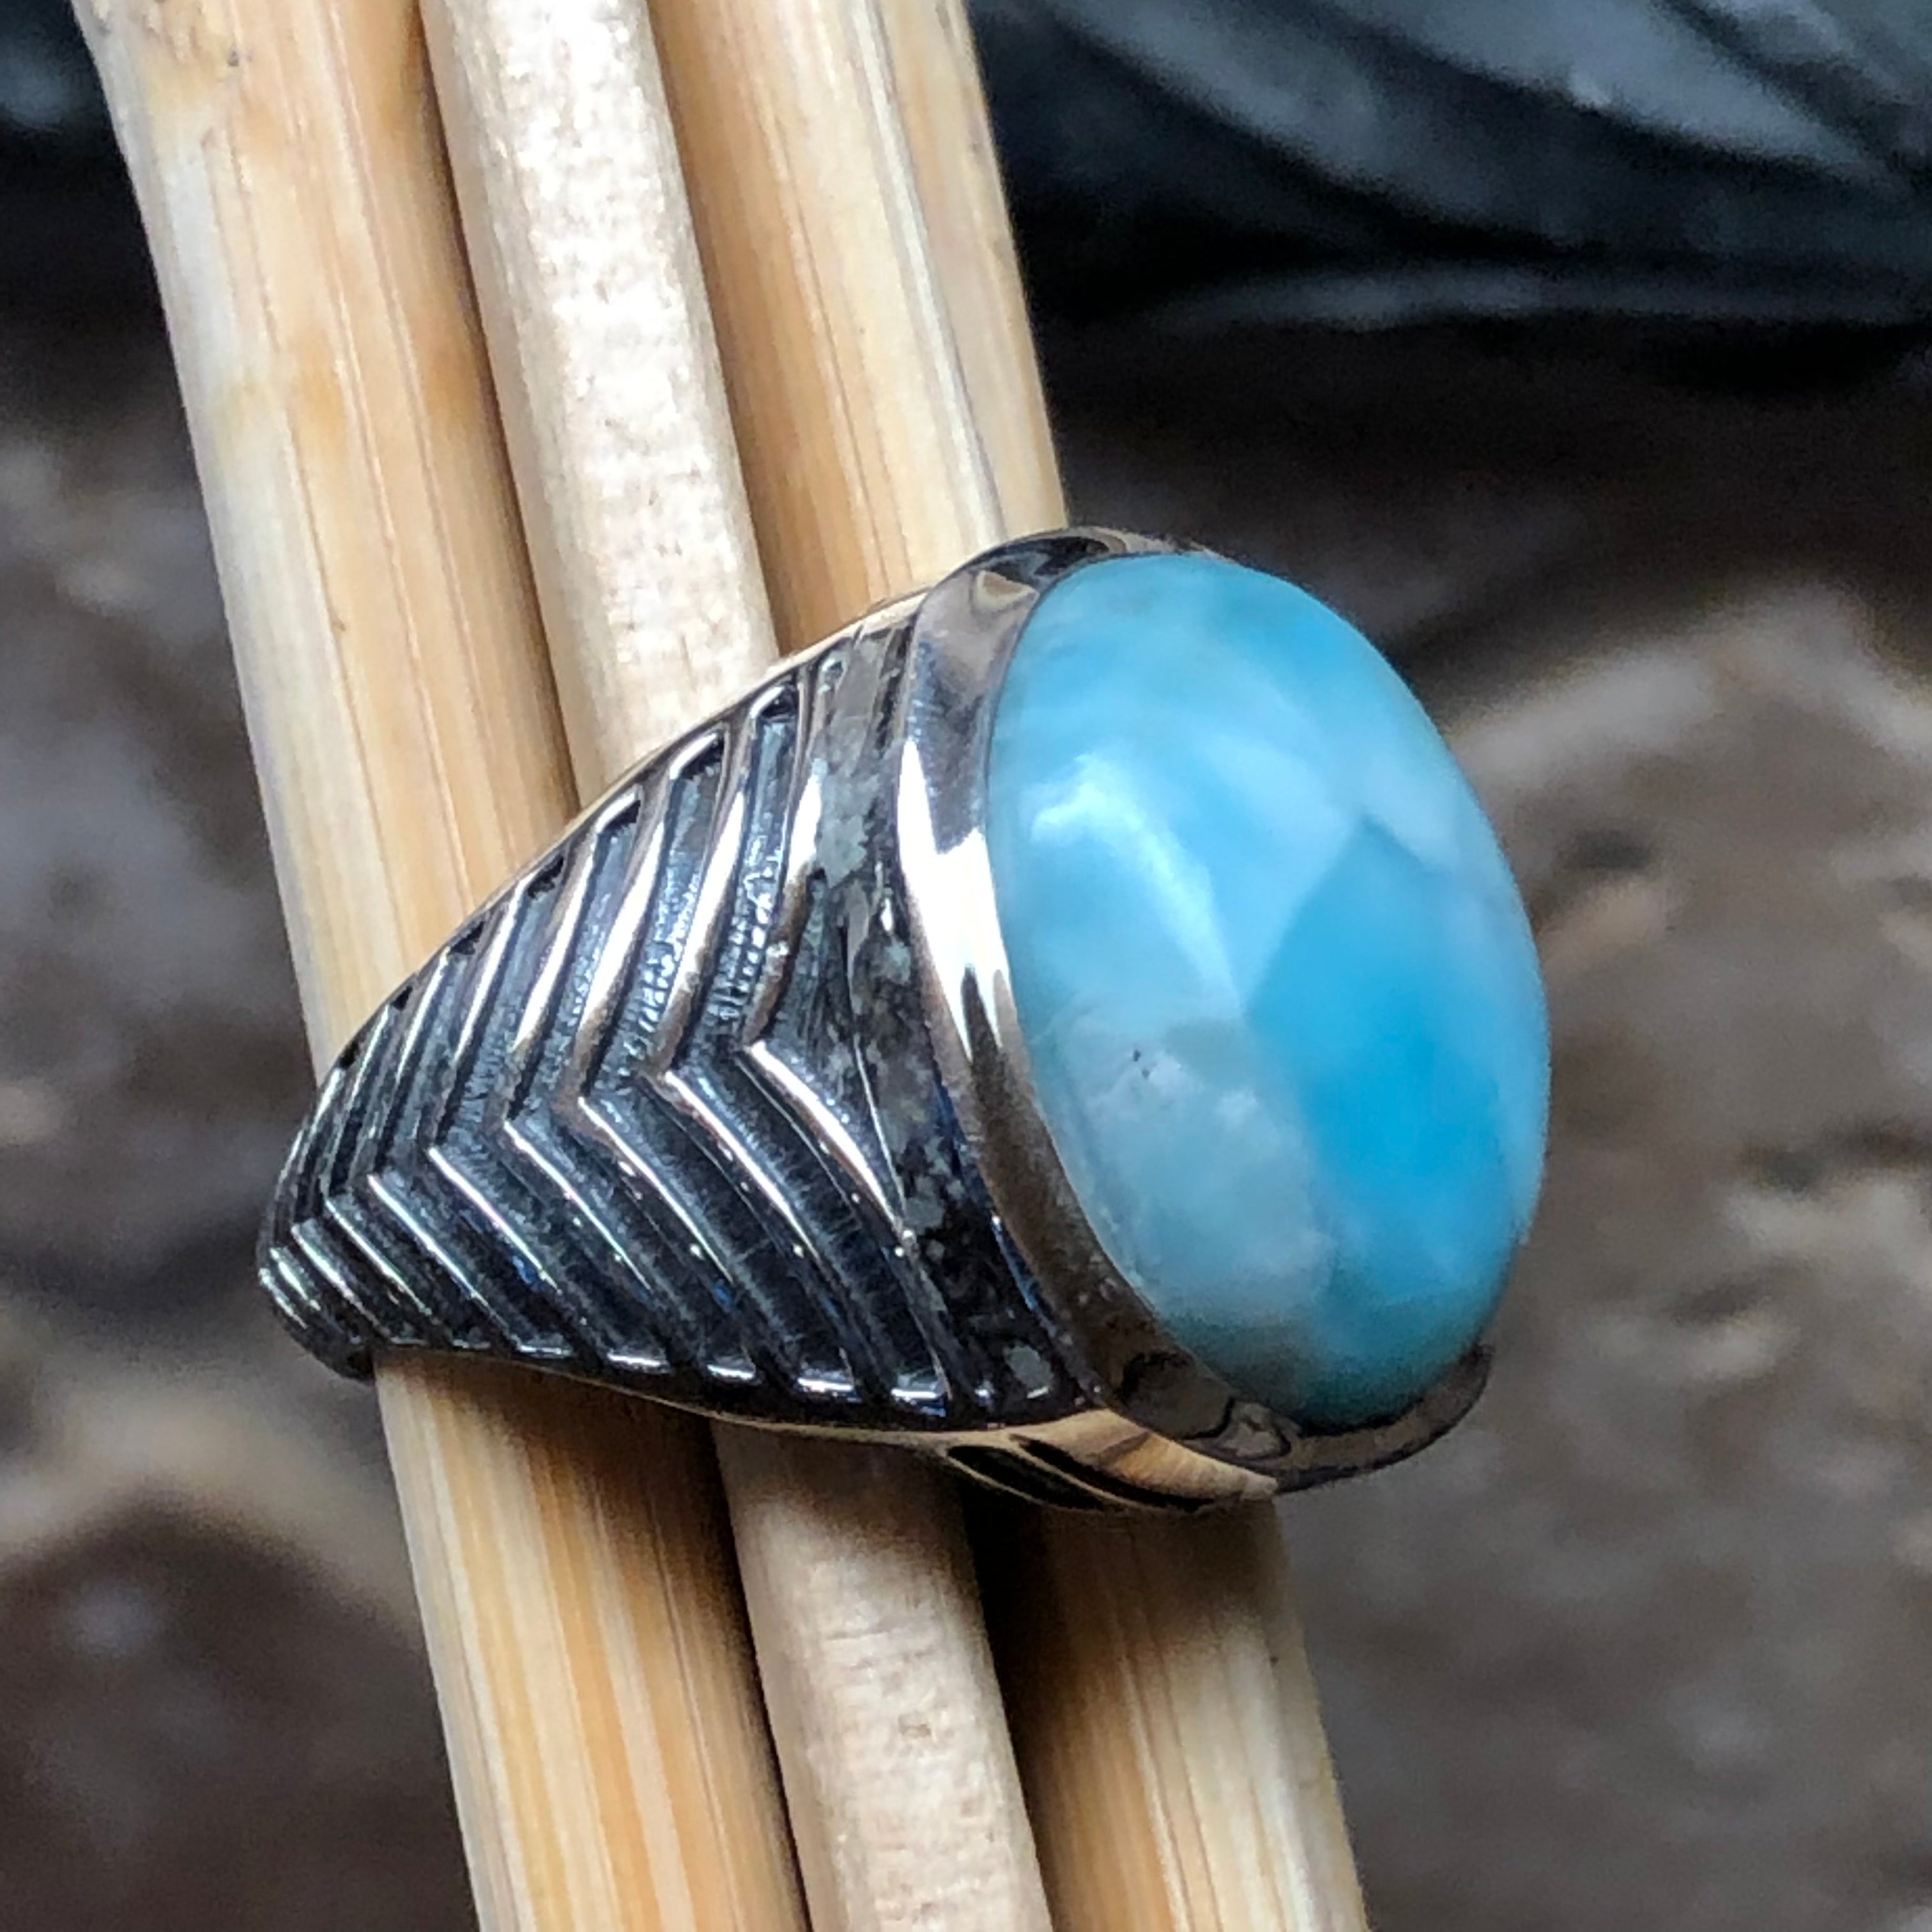 Natural Dominican Larimar 925 Solid Sterling Silver Men's Ring Size 8, 9, 10, 11, 12, 13 - Natural Rocks by Kala